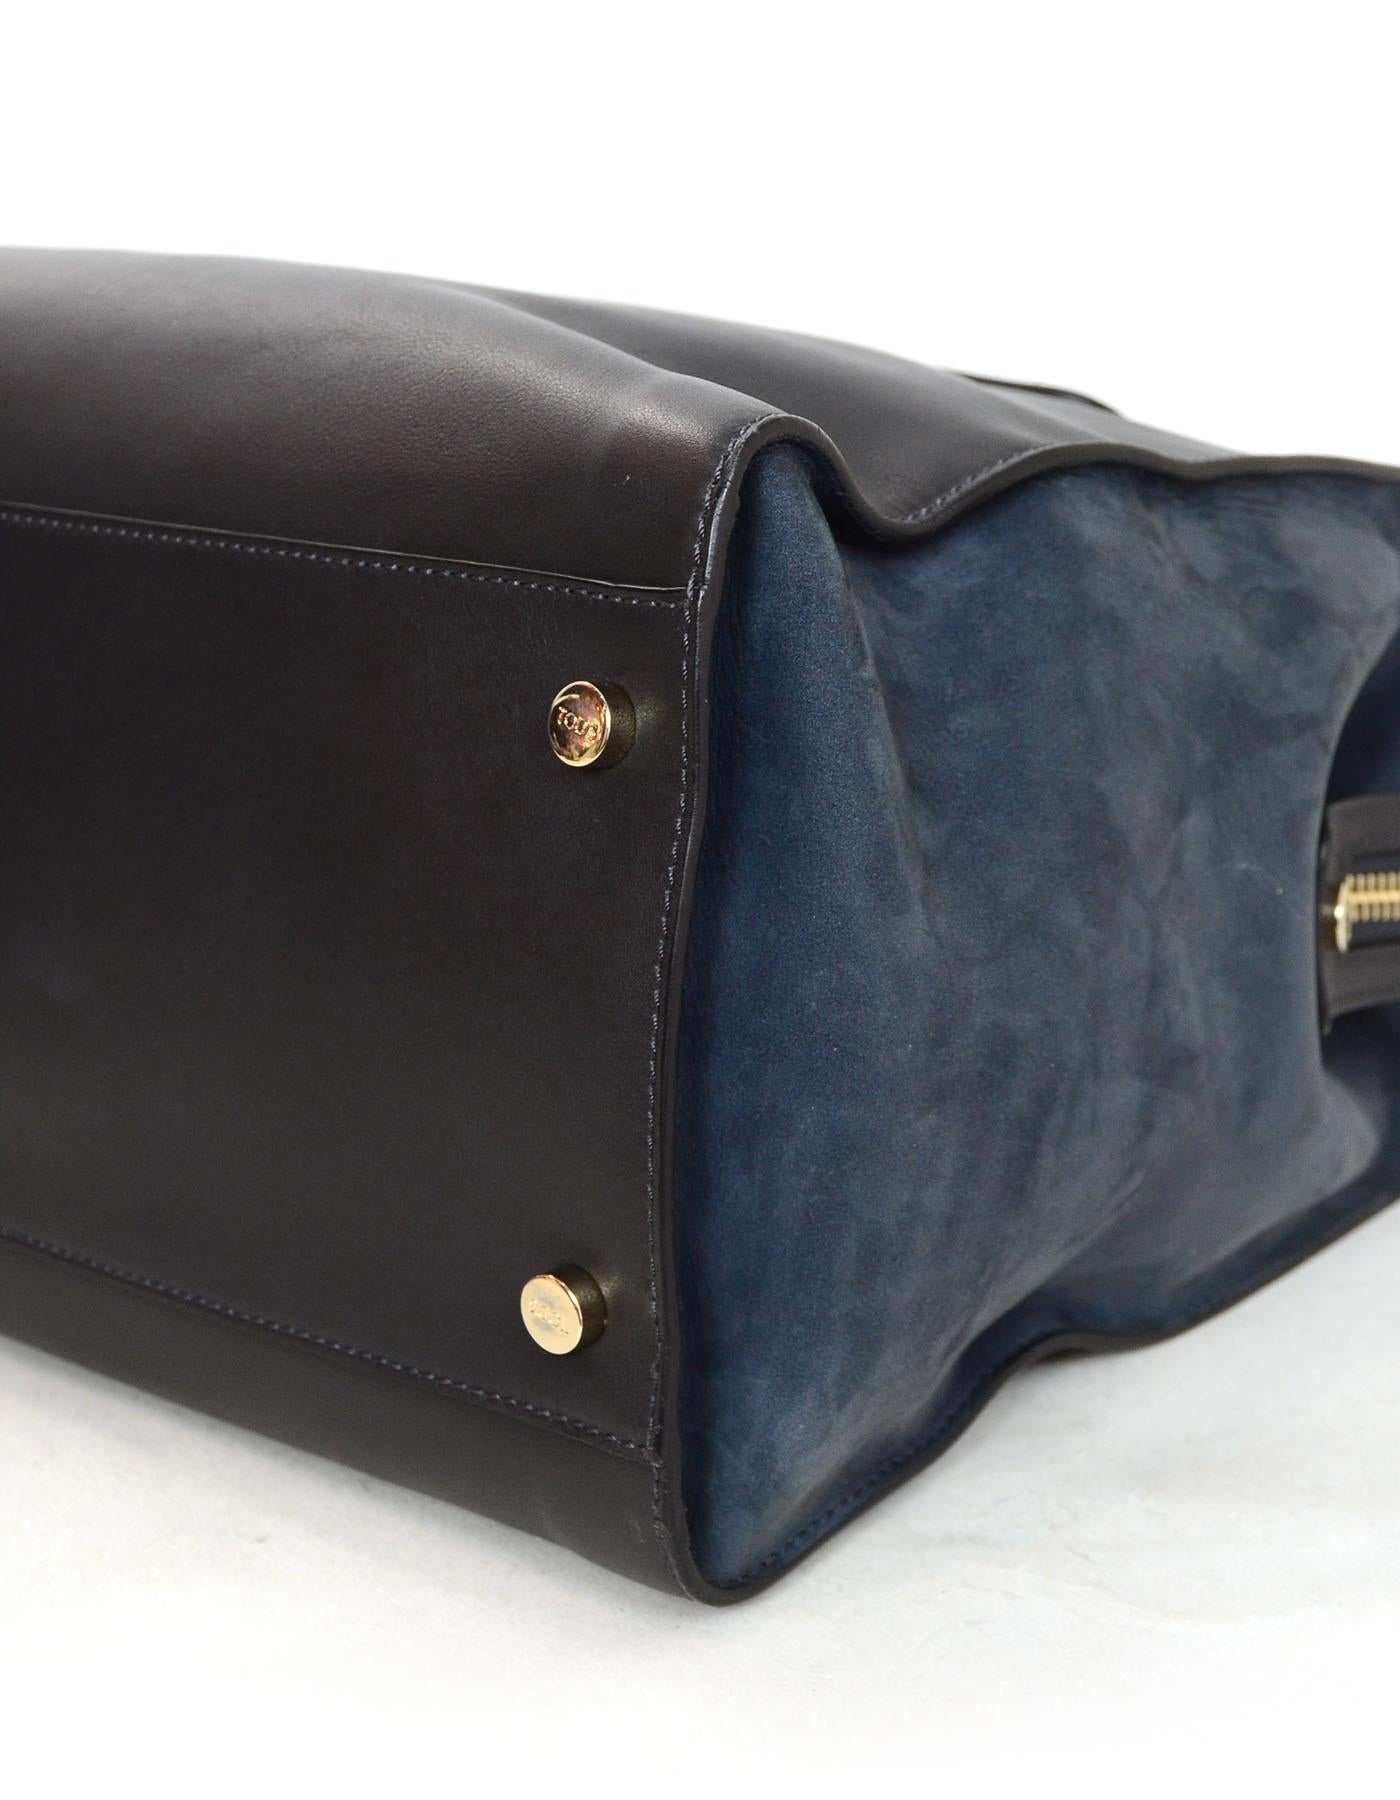 Women's Tod's Black Leather & Navy Suede Tote Bag with Dust Bag